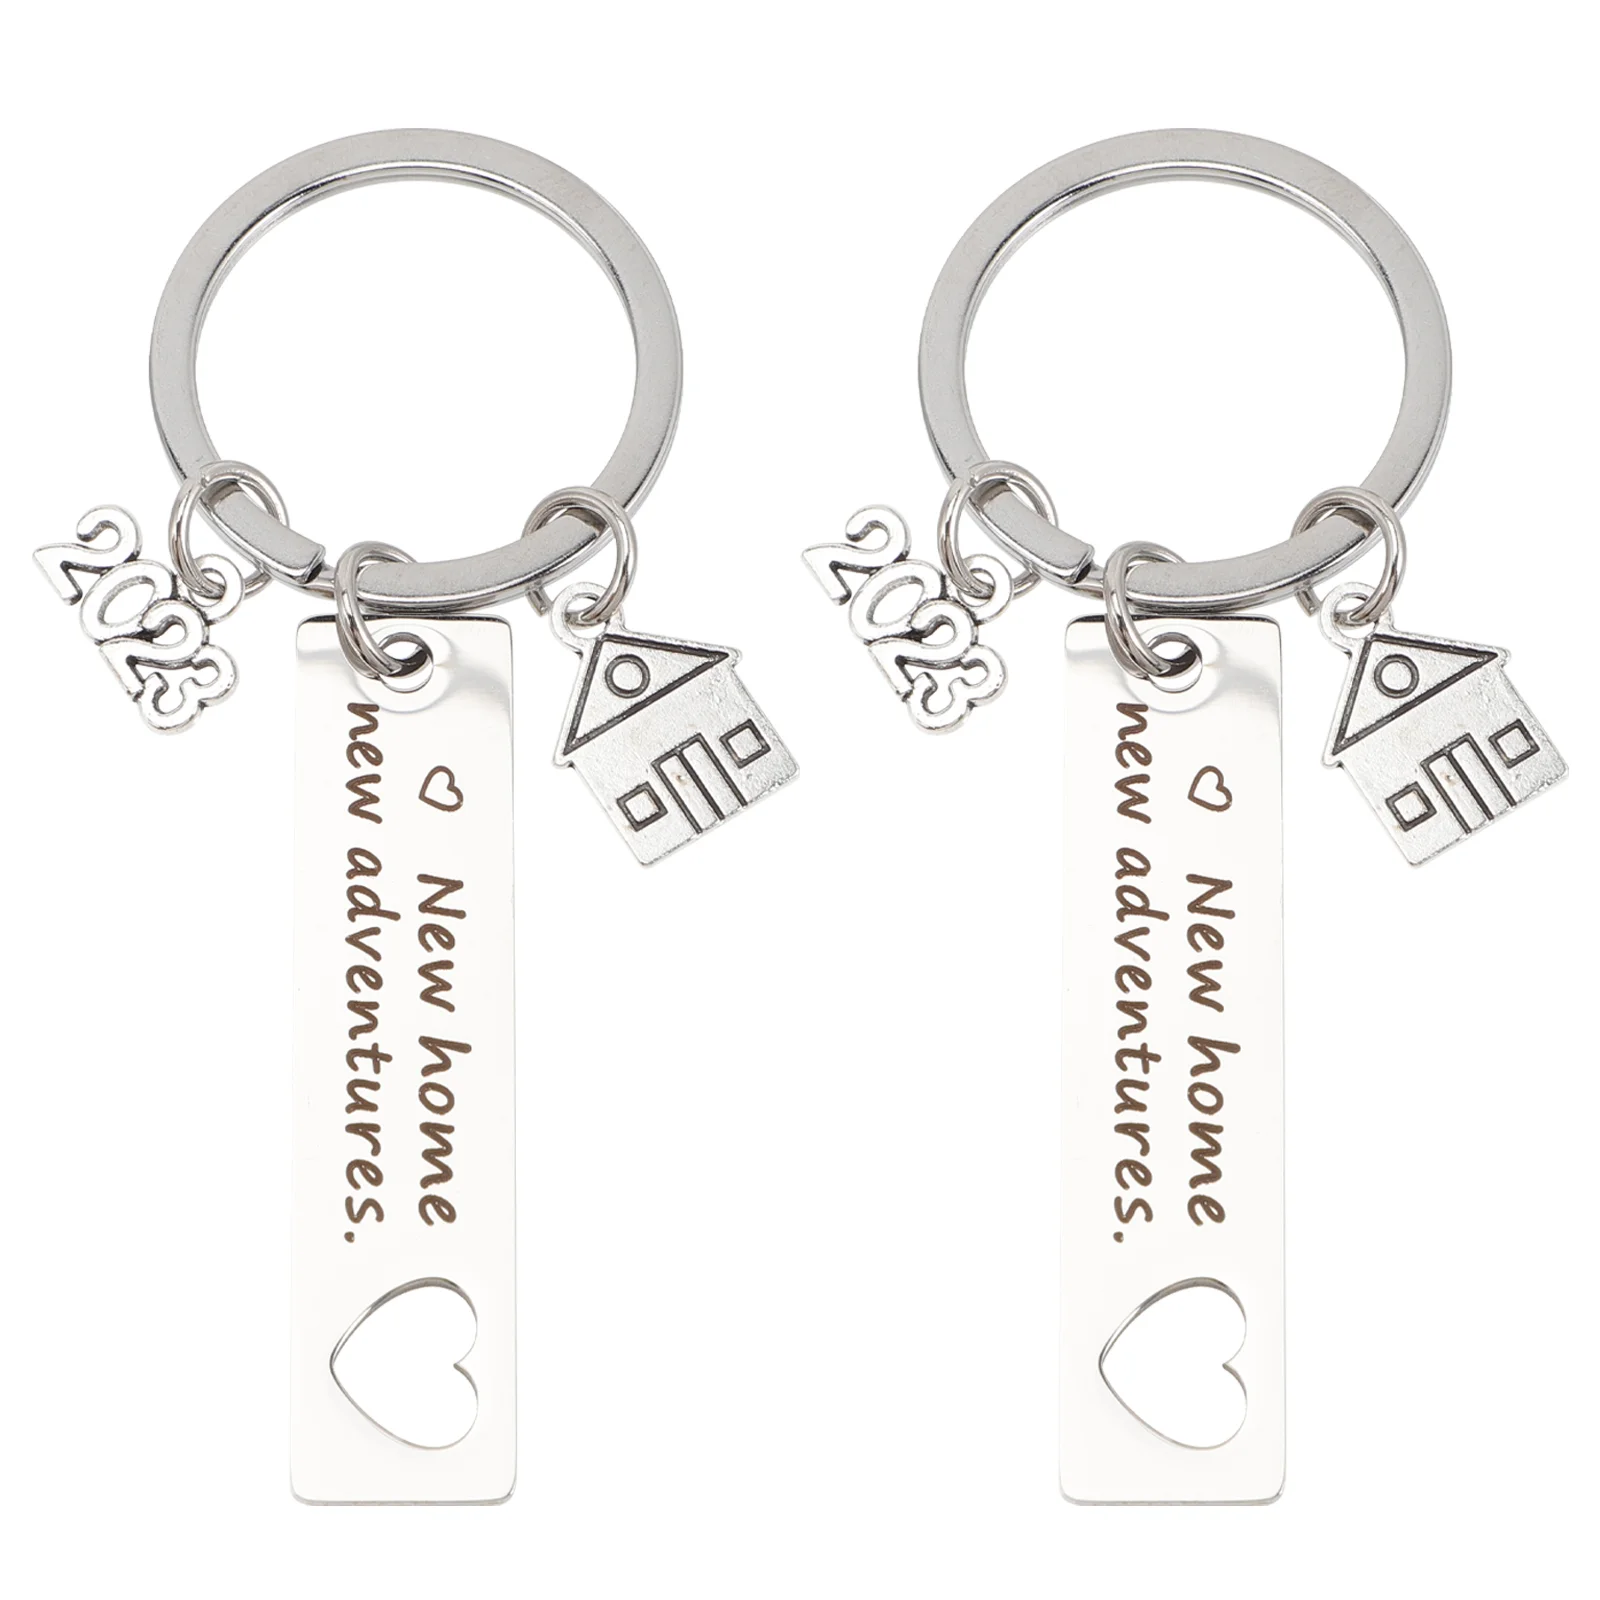 

New Key Keychain Home Gifts Housewarming Gift House Chain Moving Adventures Pendants Keyring Rings Homeowners Chains Charms Ring